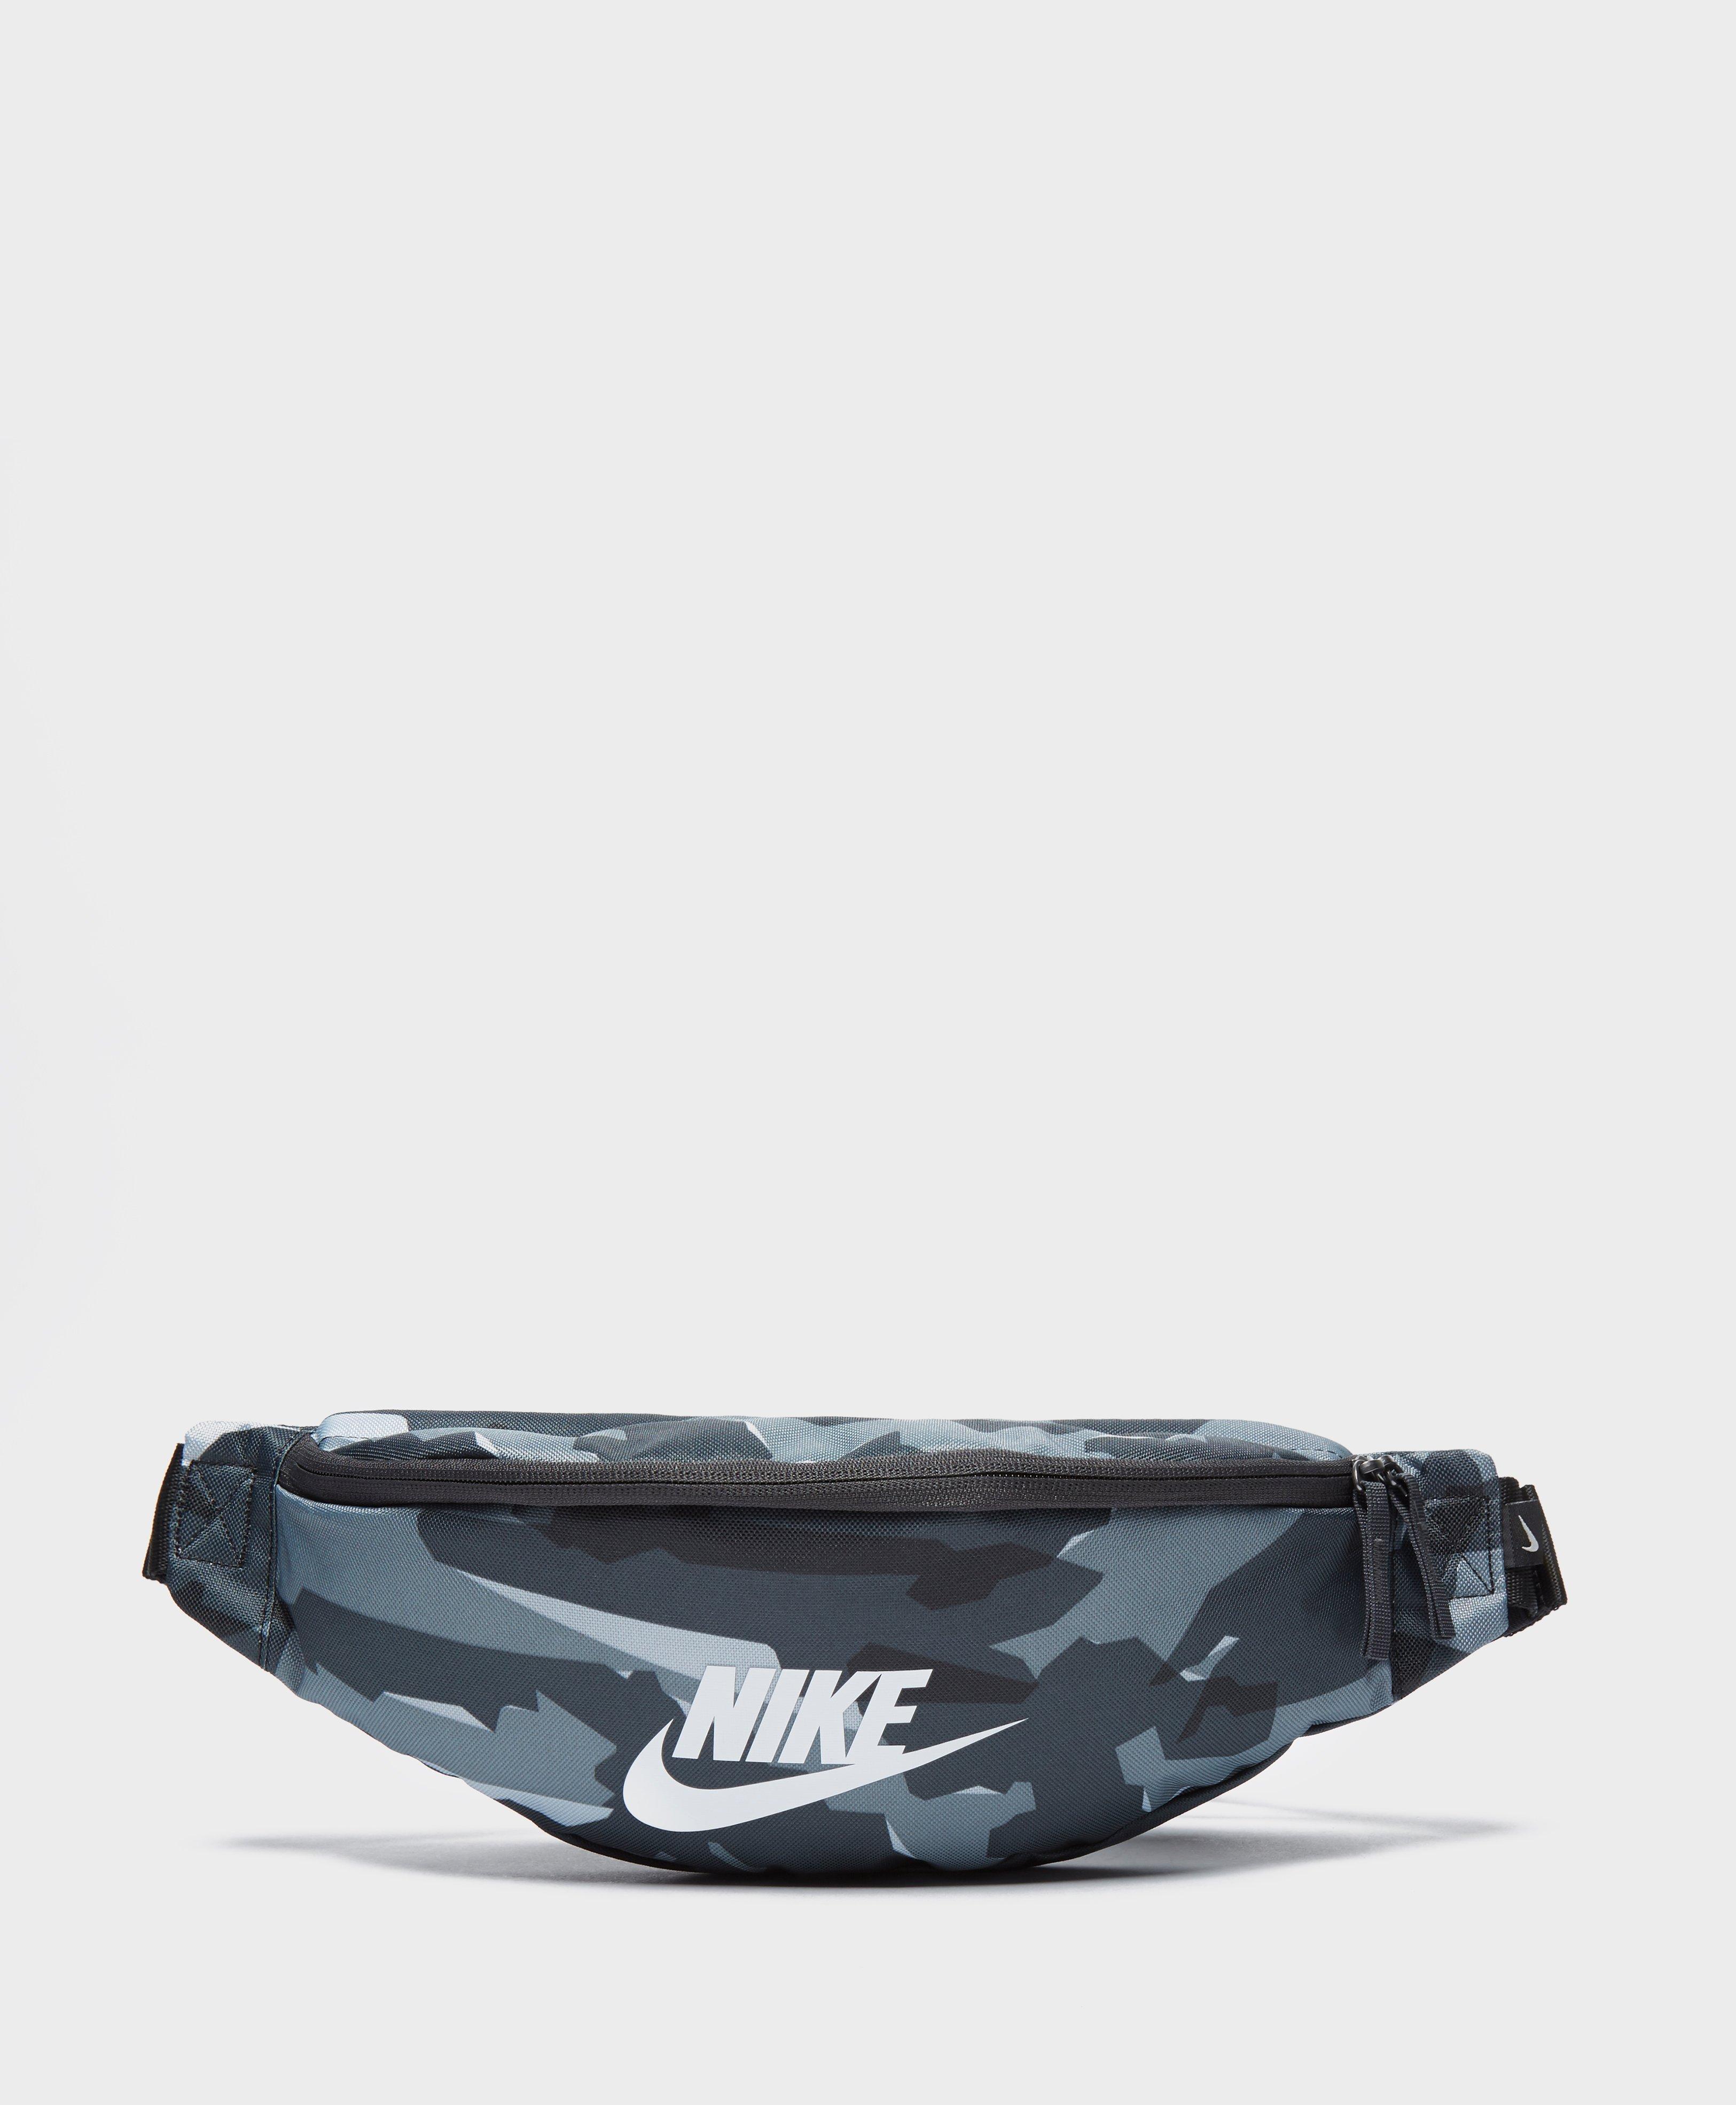 Nike Synthetic Camo Bum Bag in Blue for Men - Lyst